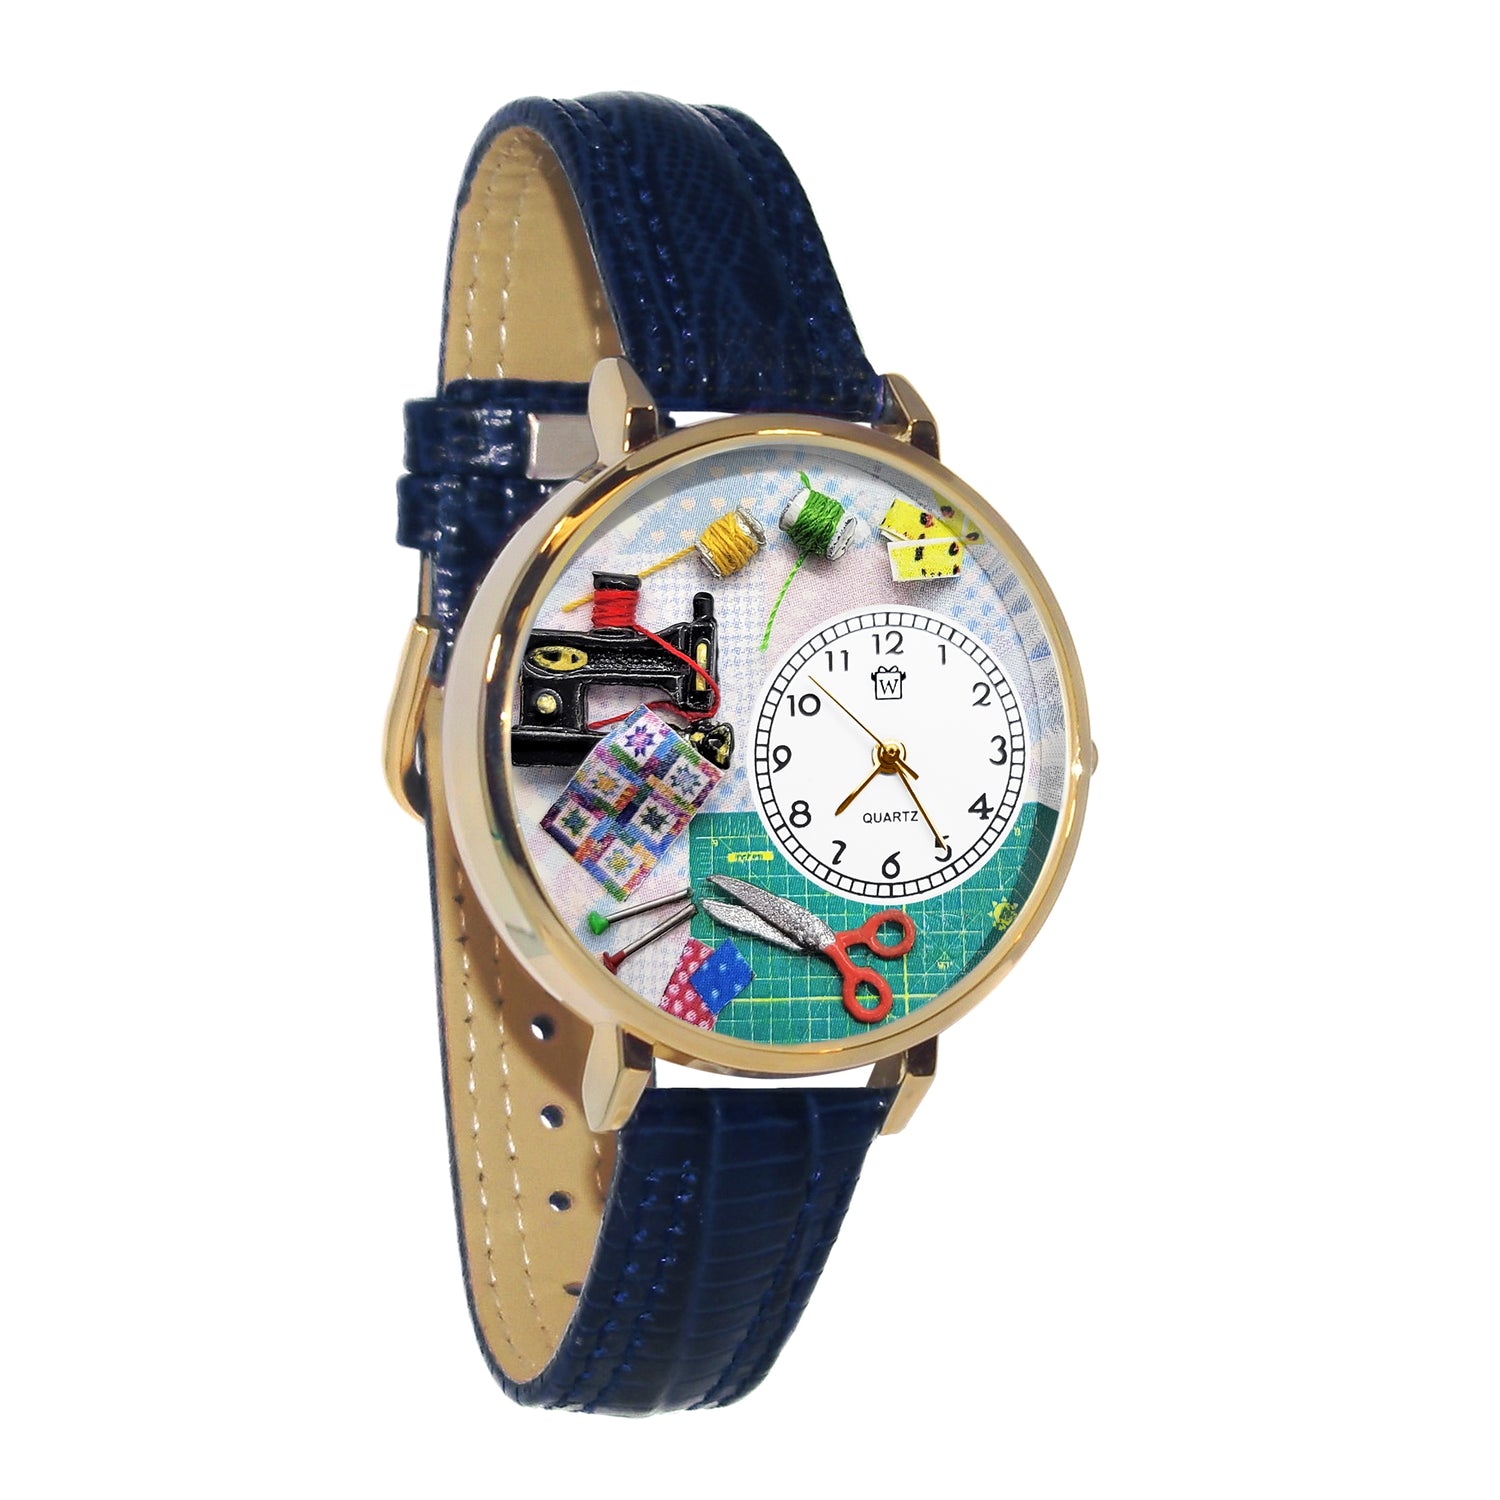 Whimsical Gifts | Quilting 3D Watch Large Style | Handmade in USA | Hobbies & Special Interests | Sewing & Crafting | Novelty Unique Fun Miniatures Gift | Gold Finish Navy Blue Leather Watch Band